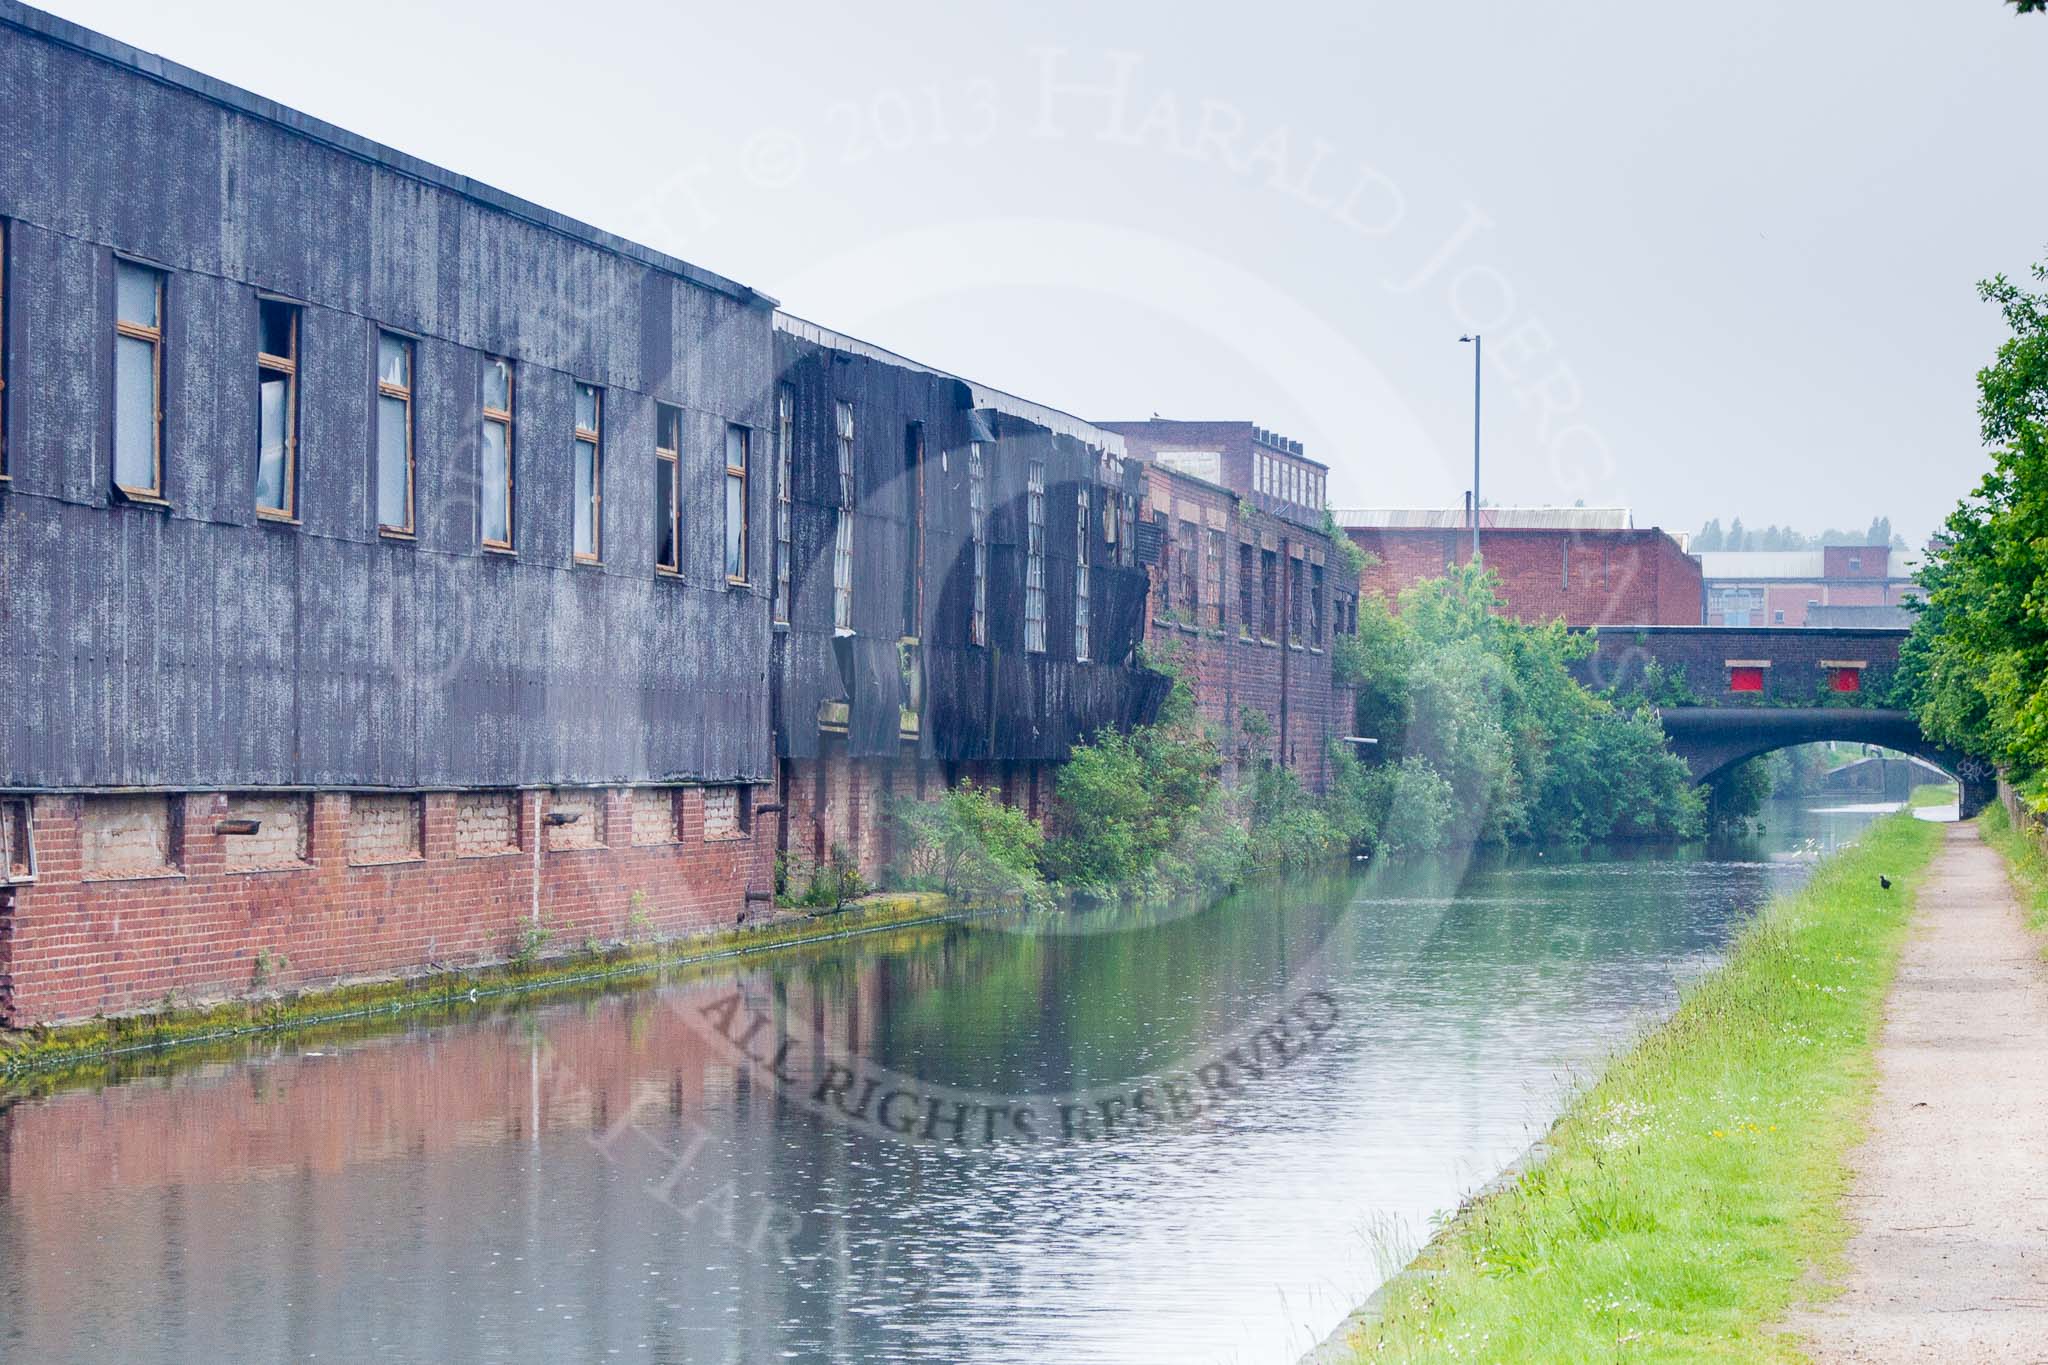 BCN Marathon Challenge 2014: Bridge 106 (Duddeston Mill Road Bridge) at Garrison Locks on the Grand Union Canal (Birmingham & Warwick Junction Canal), with old industry in a rather sad state on the left - but work seemed to be going on inside.
Birmingham Canal Navigation,


United Kingdom,
on 24 May 2014 at 08:35, image #76